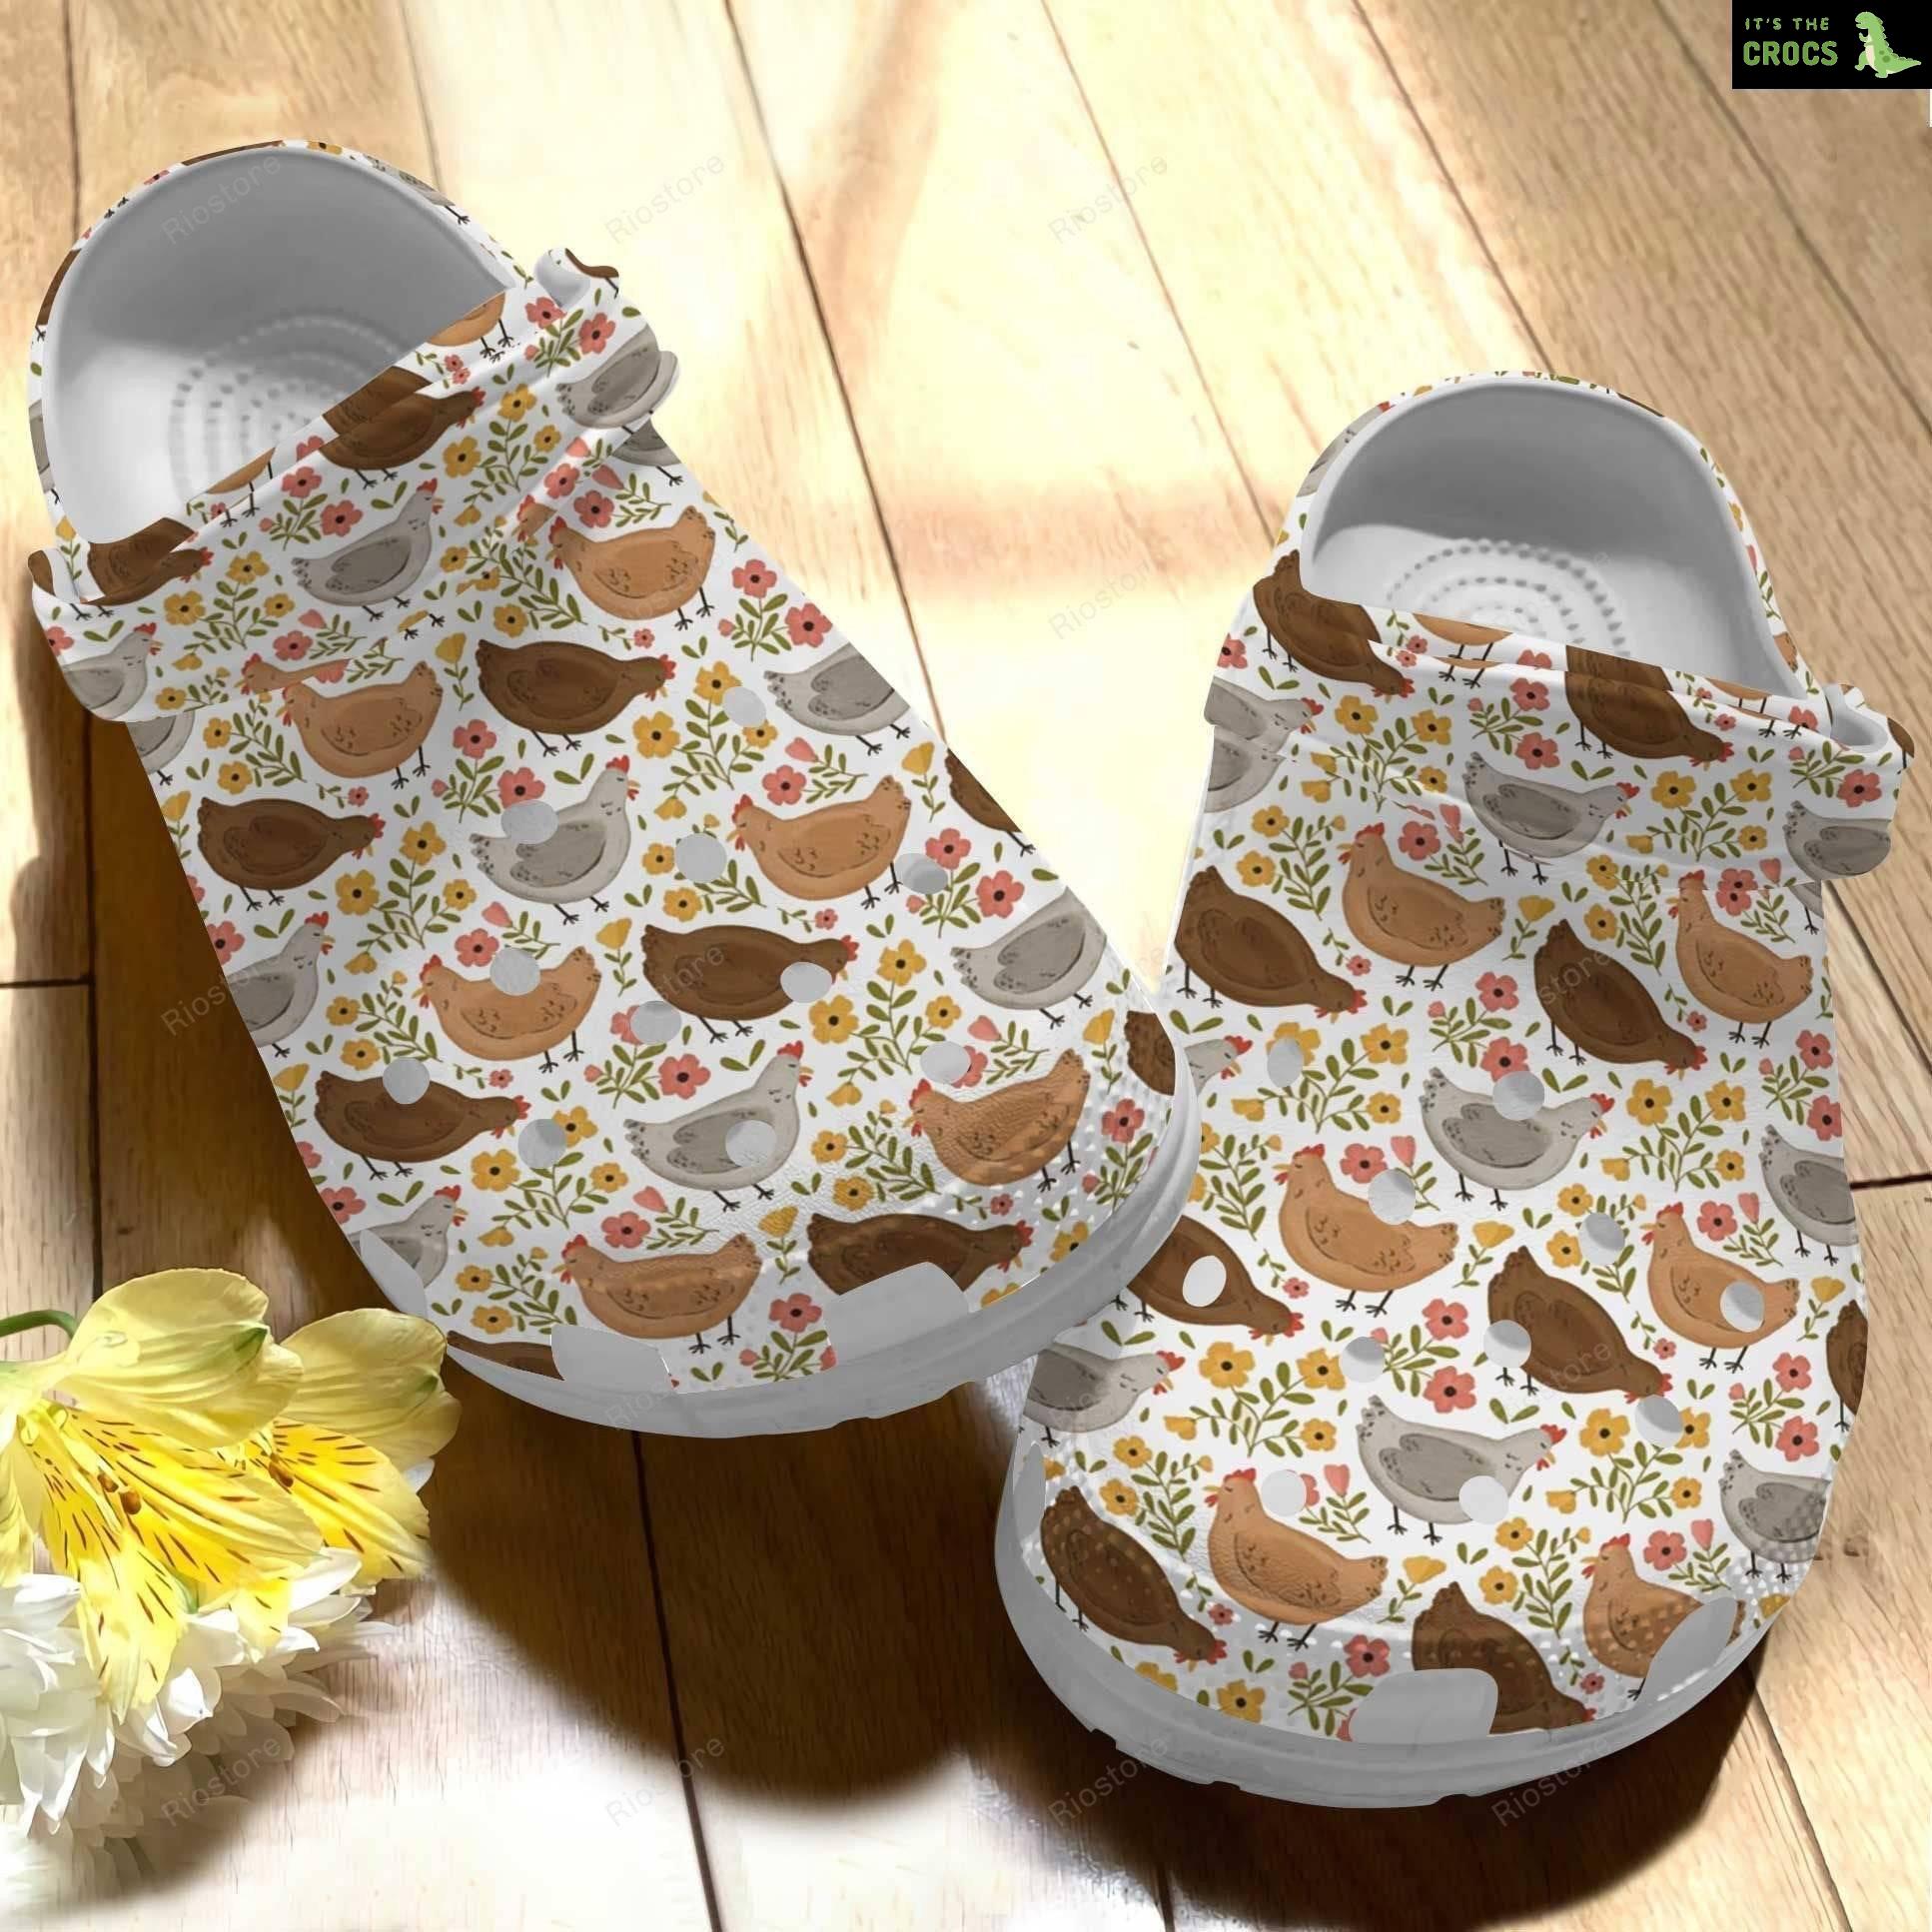 Chickens In The Garden Croc – Chicken Flower Crocs Shoes Crocbland Clog Gifts For Mother Day